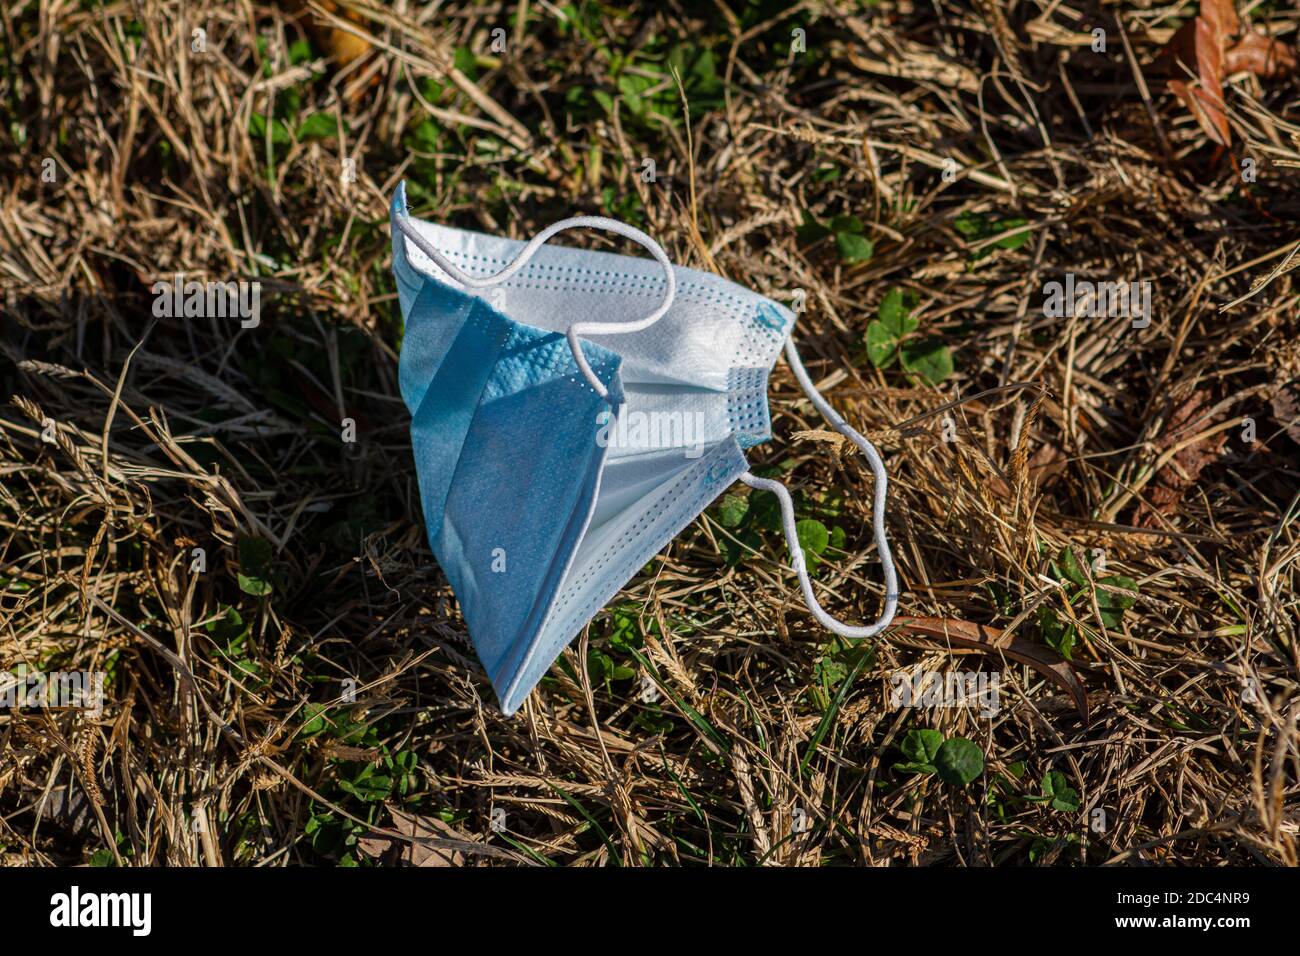 Discarded face masks in Mccarren Park, Brooklyn, New York during the COVID-19 pandemic in the Fall of 2020. Stock Photo